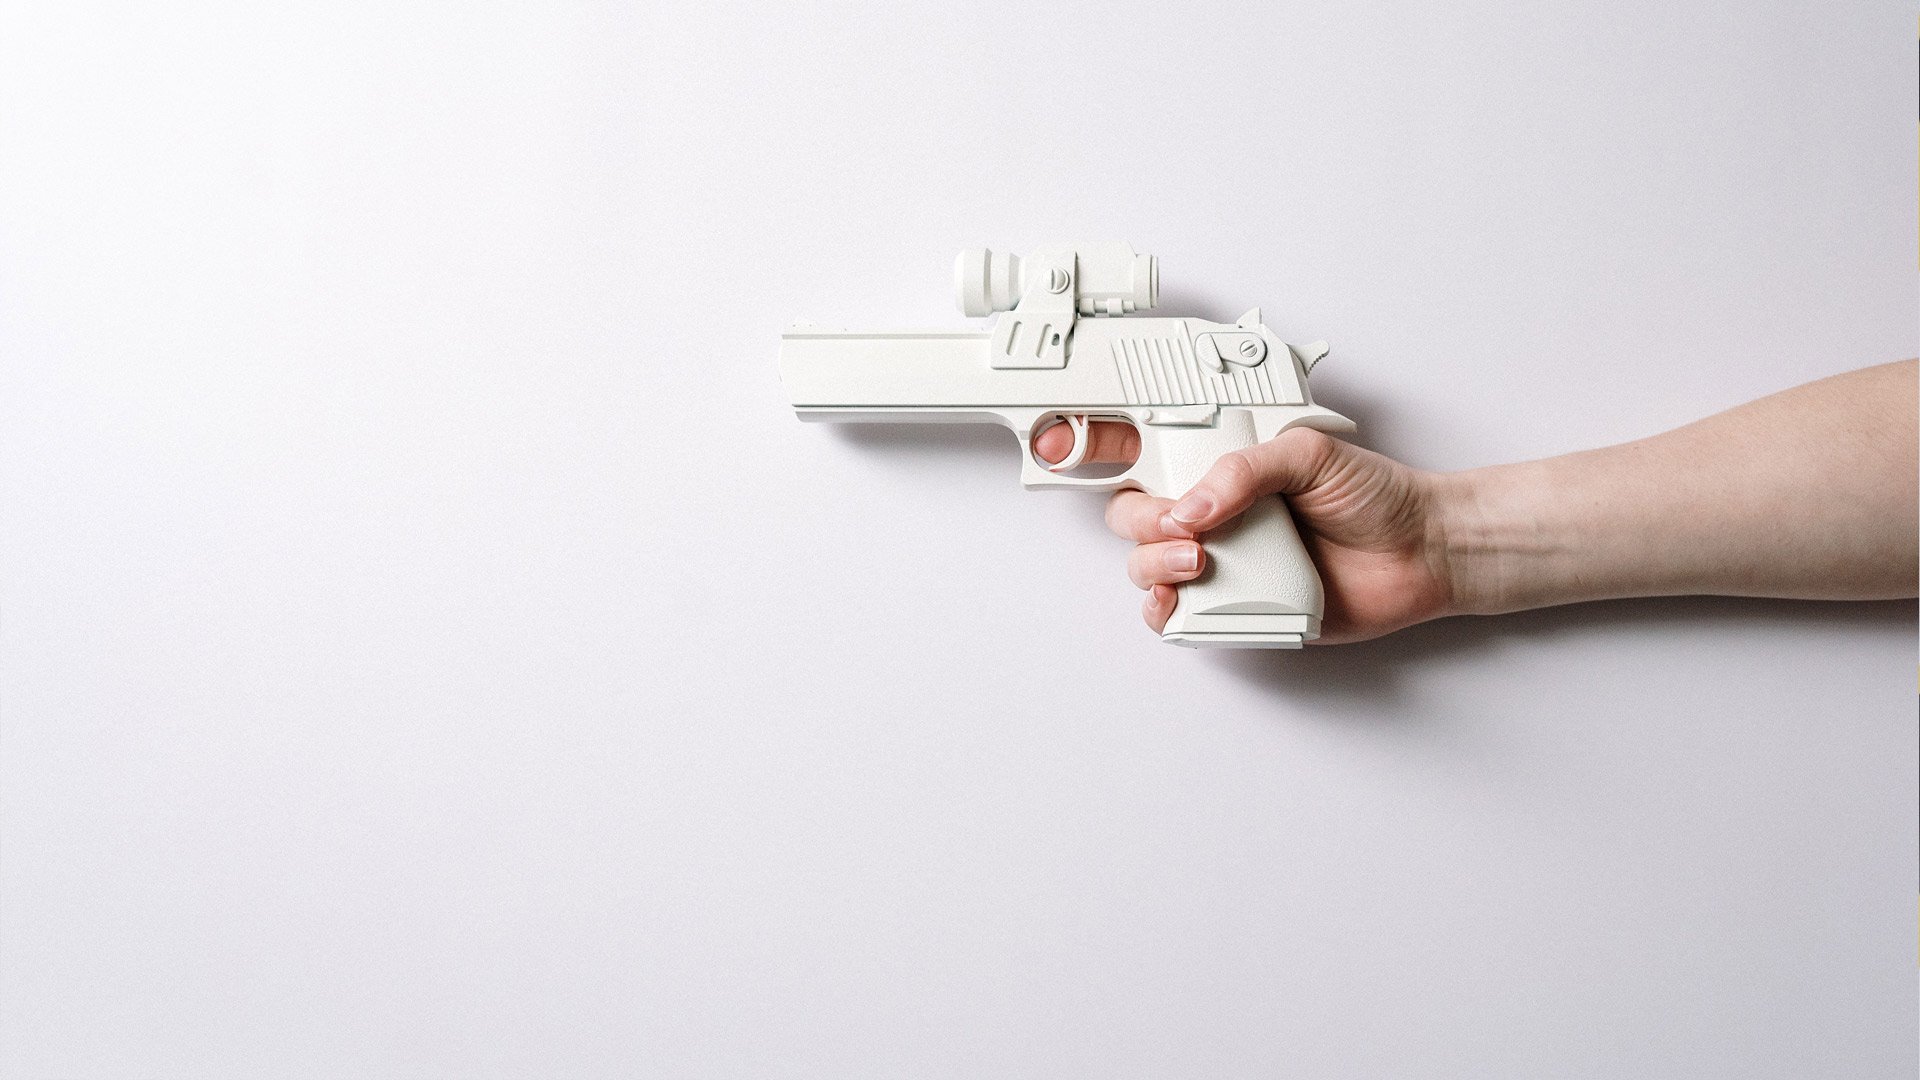 3D Printed Guns Origins, Legality, Types and Status All3DP